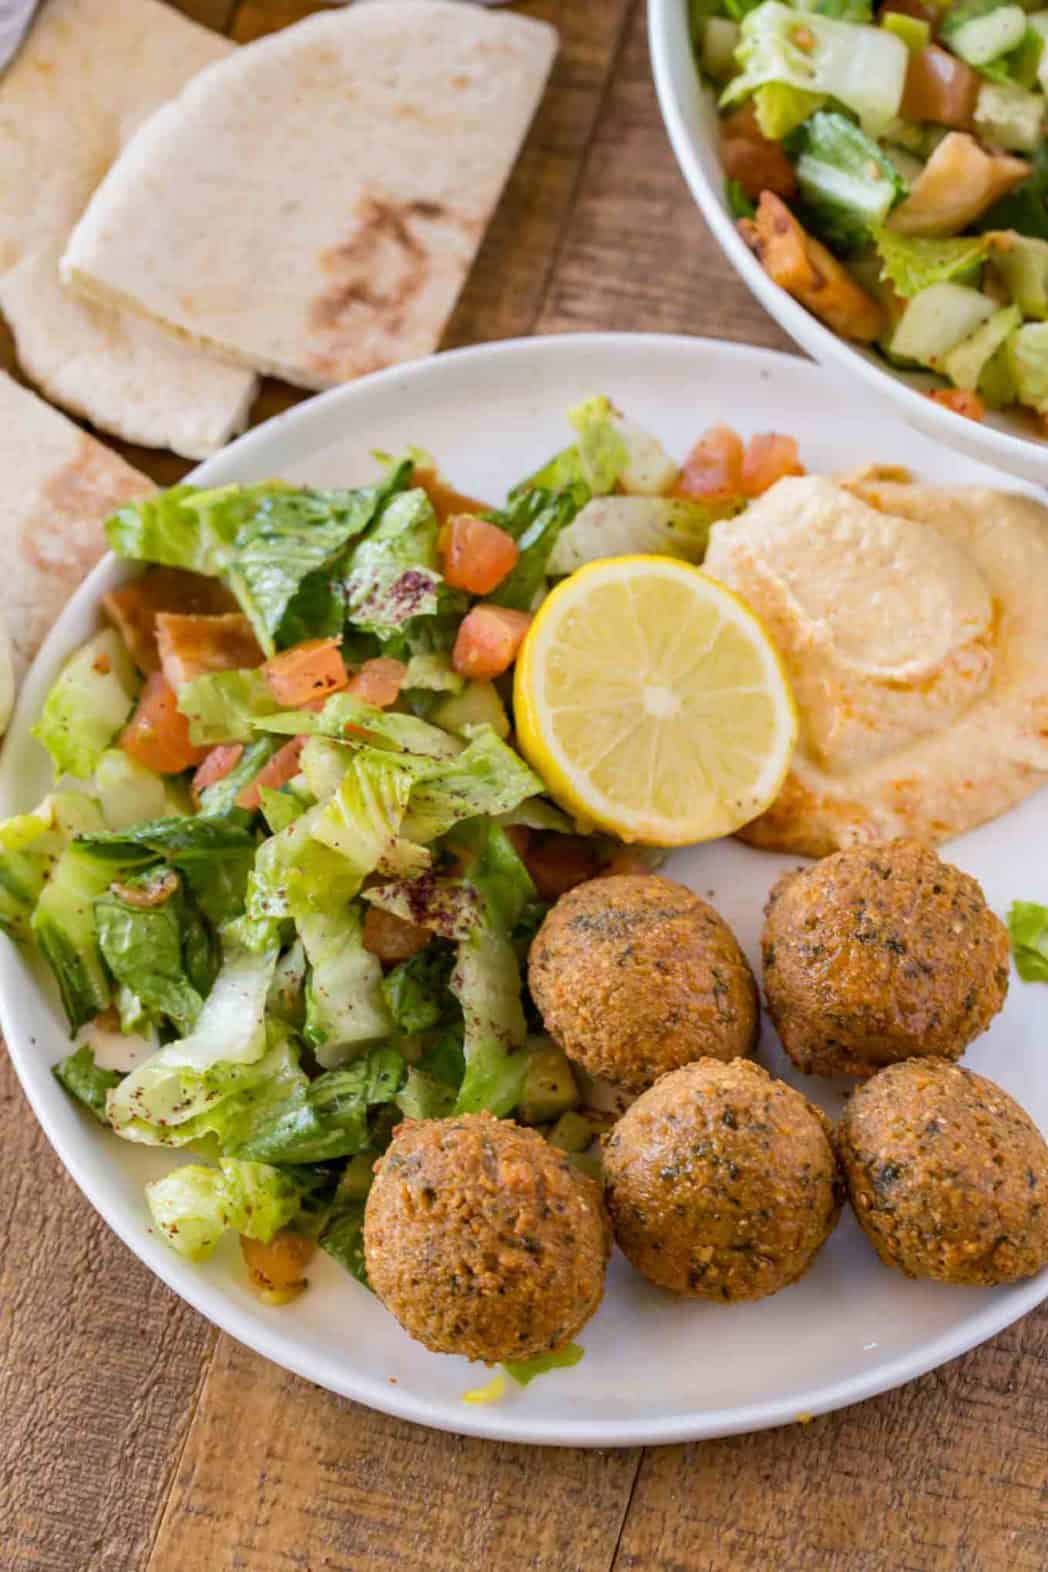 Falafel recipe with no canned beans served with hummus and salad